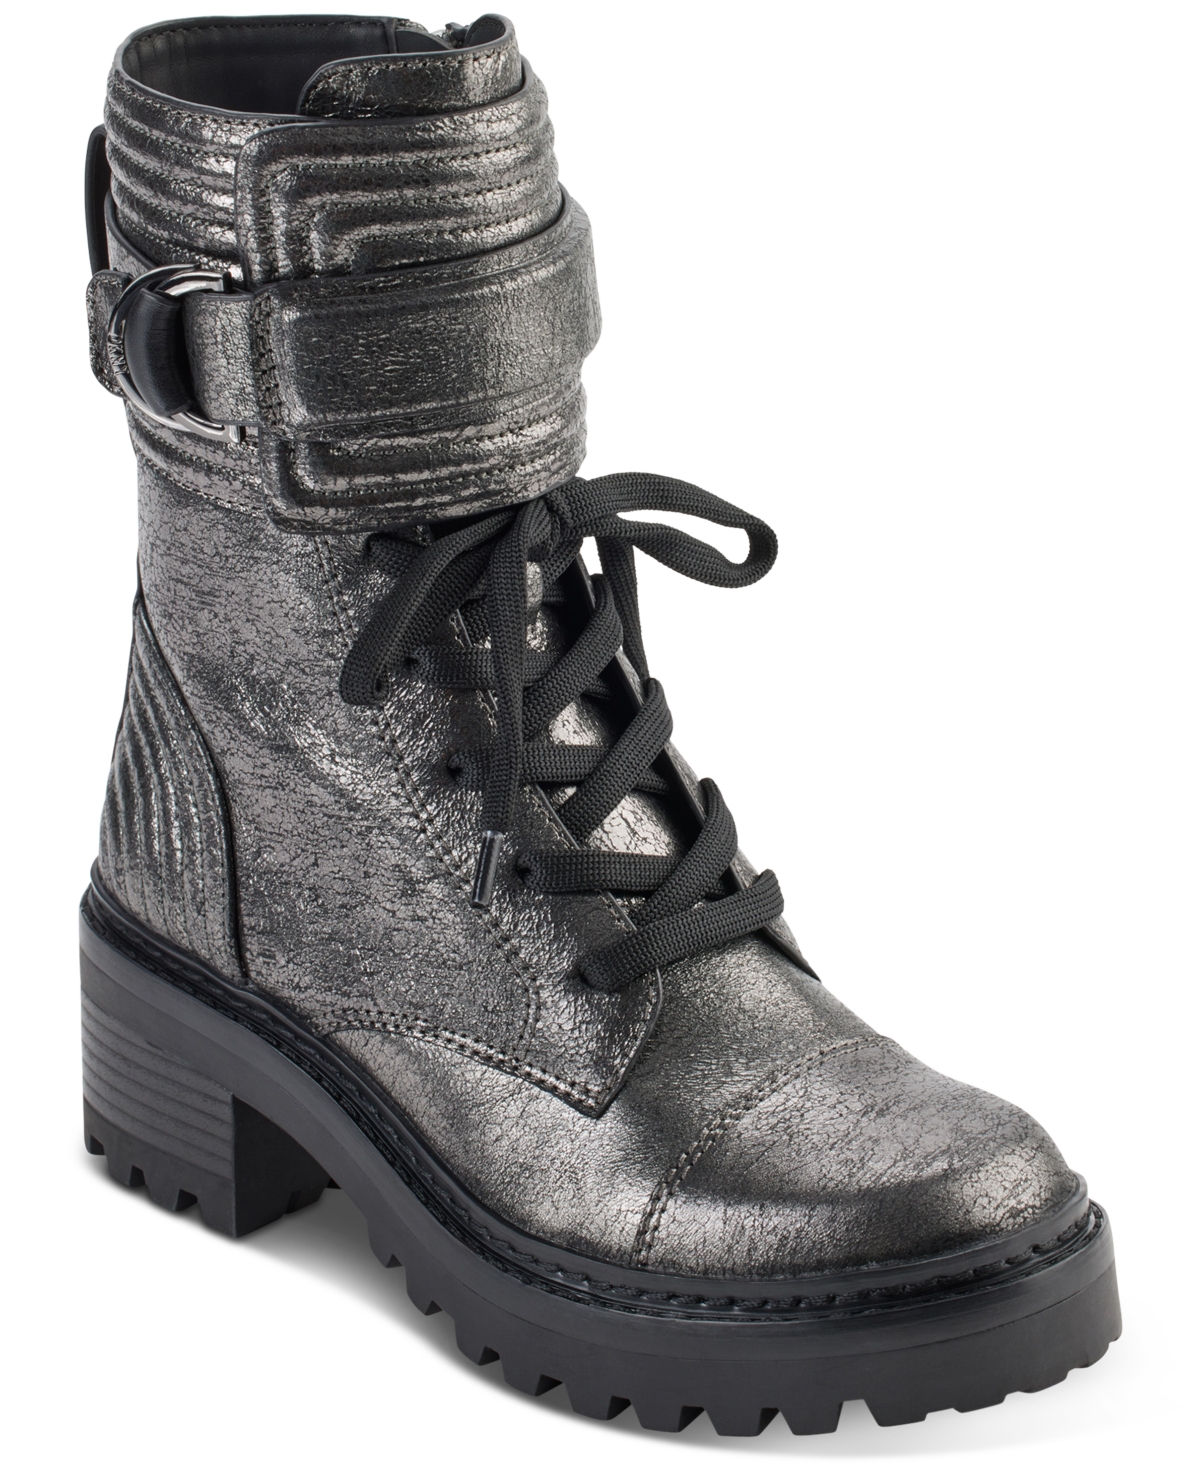 DKNY WOMEN'S BASIA BUCKLED QUILTED BLOCK-HEEL COMBAT BOOTS